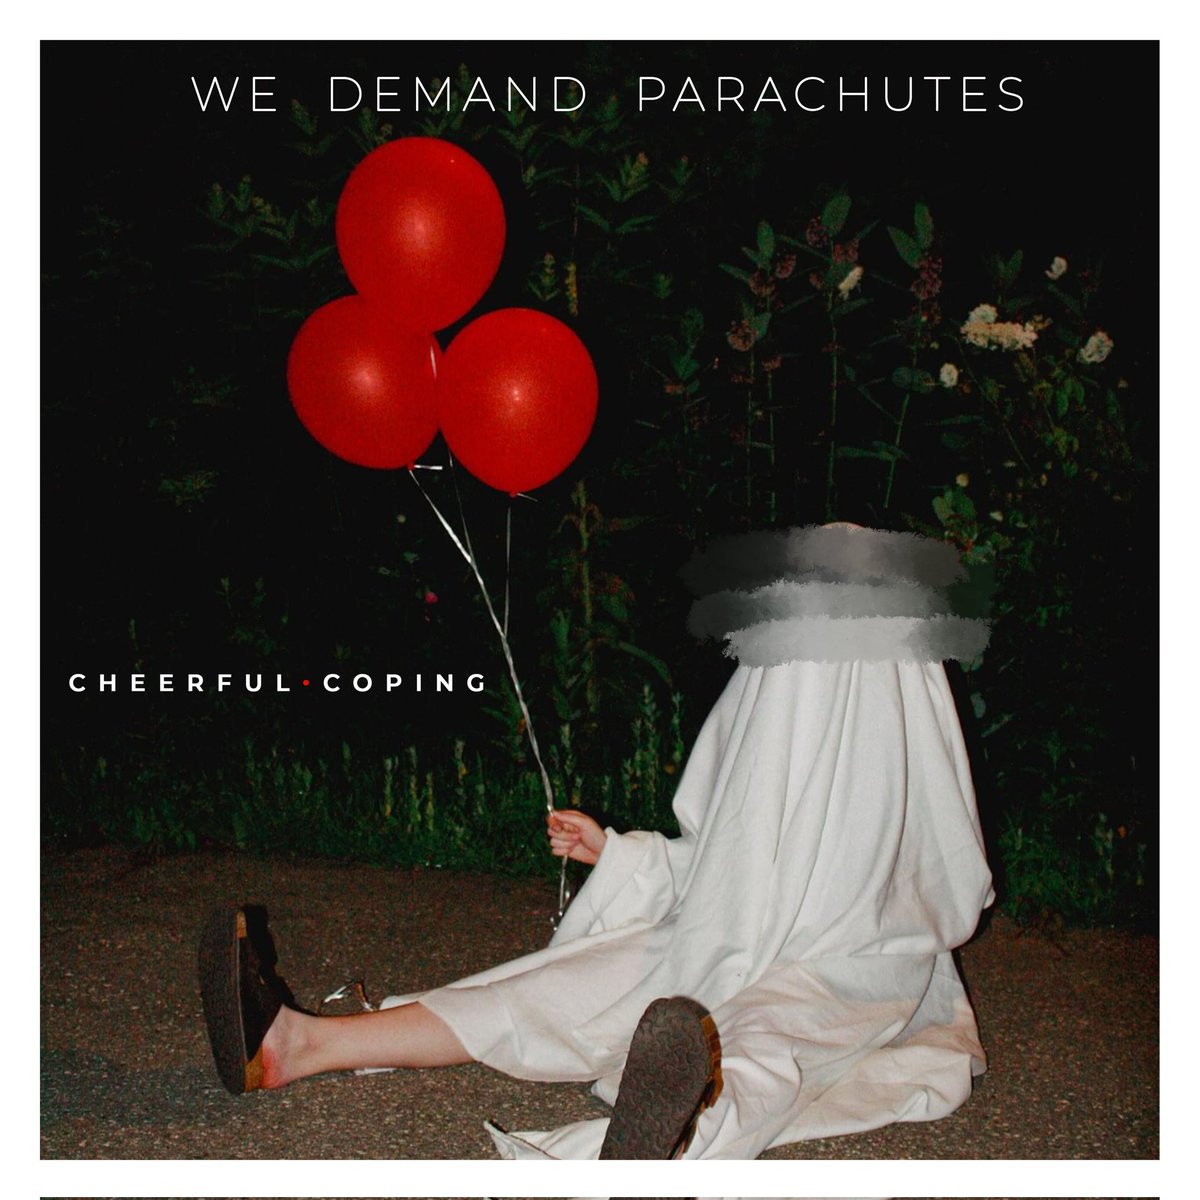 I'm listening to We Demand Parachutes - Cheerful Coping on MM Radio - Tune in at mm-radio.com #WeDemandParachutes @WDPtheband